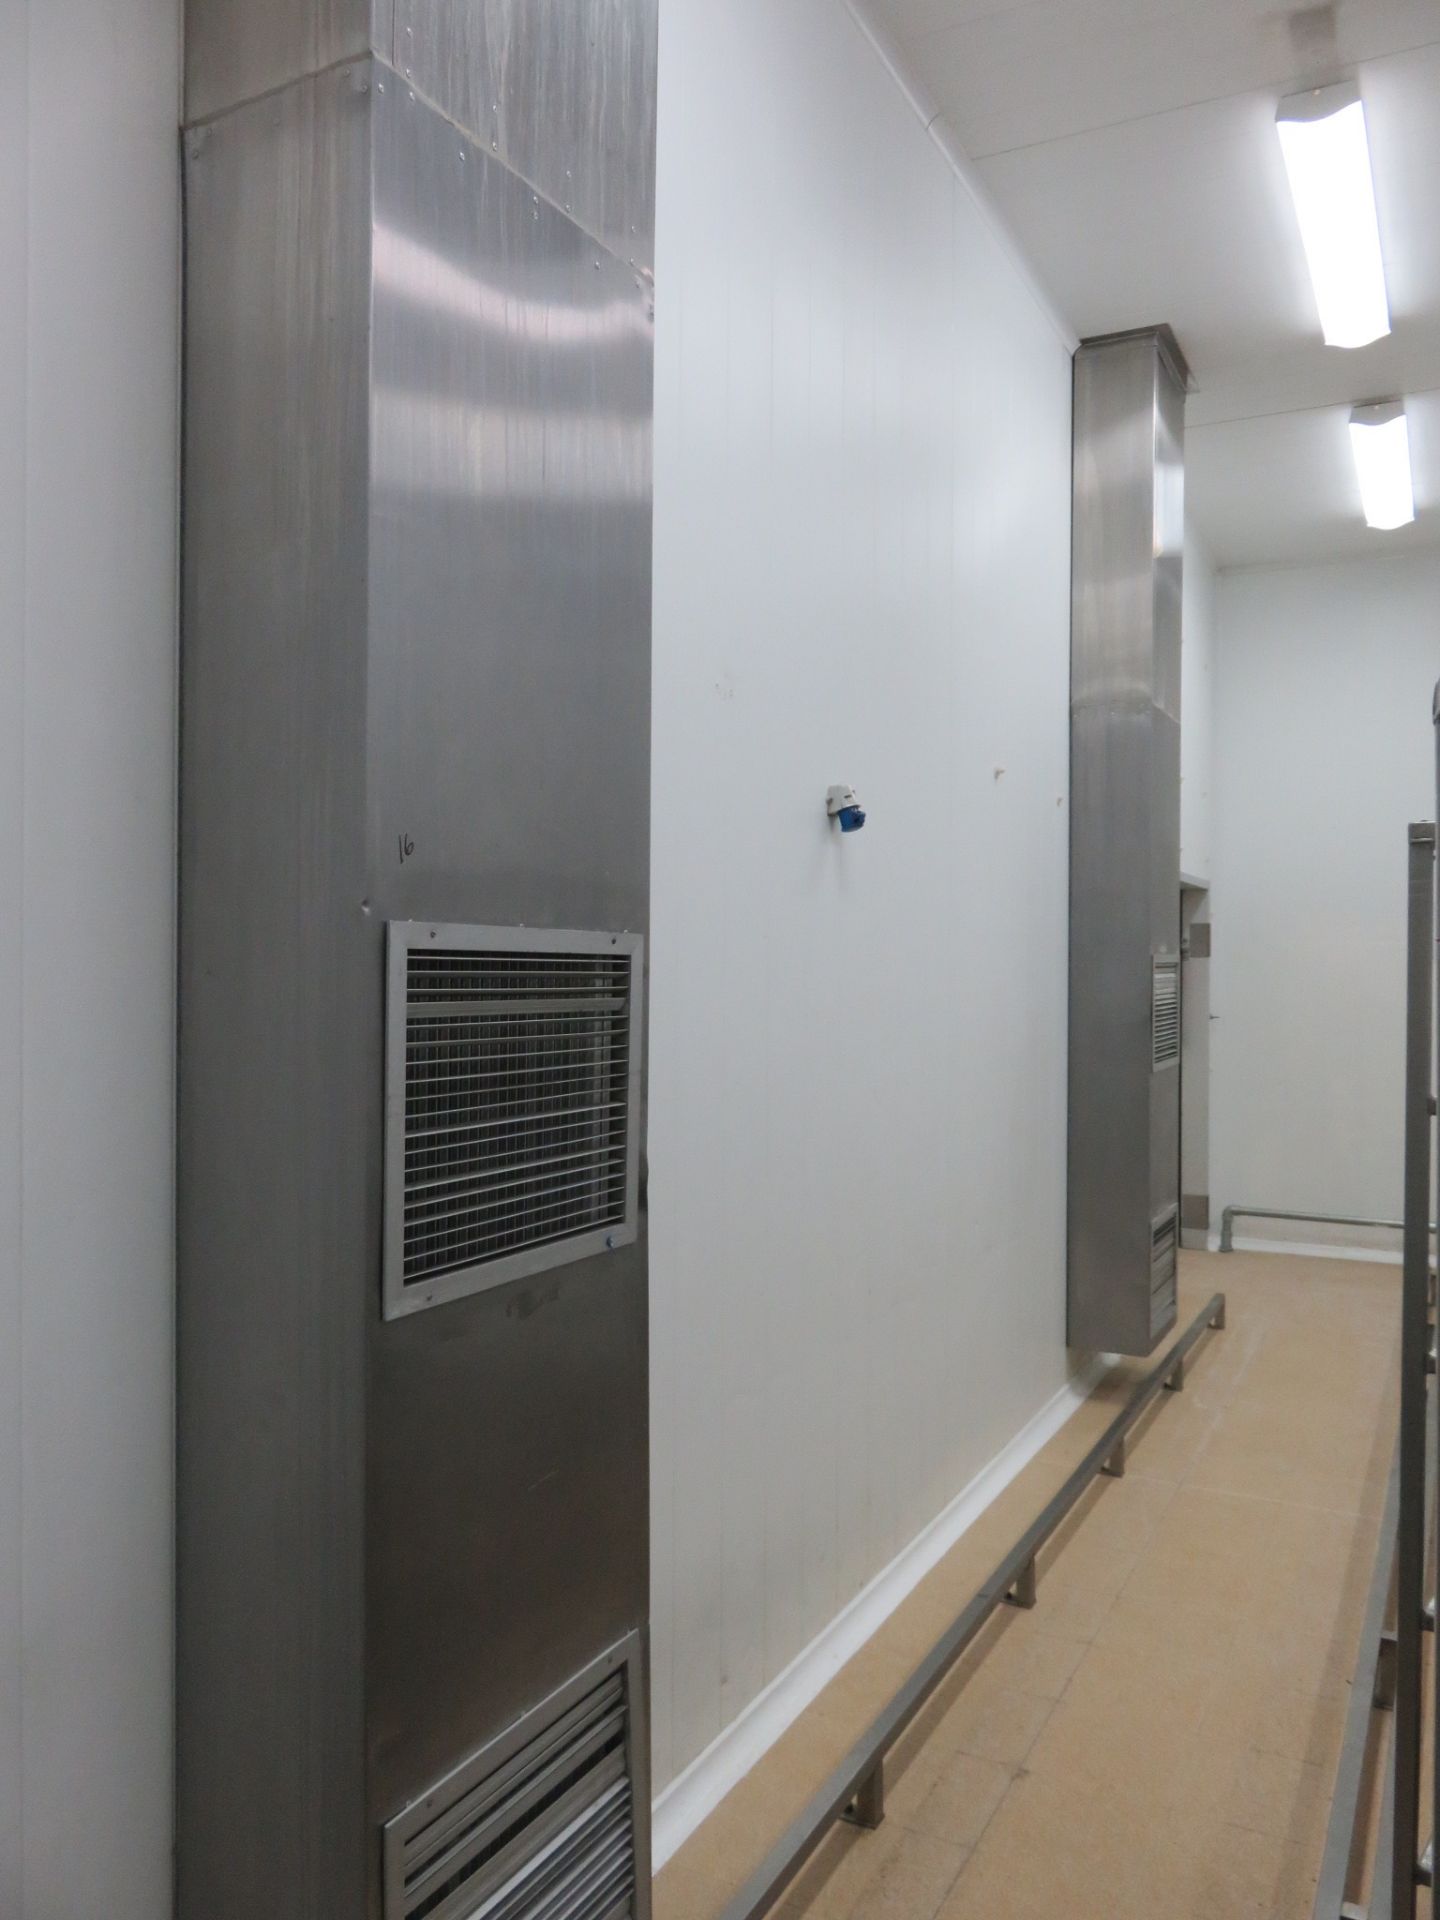 4 x S/s wall Blowers system. Lift Out £150 - Image 3 of 3